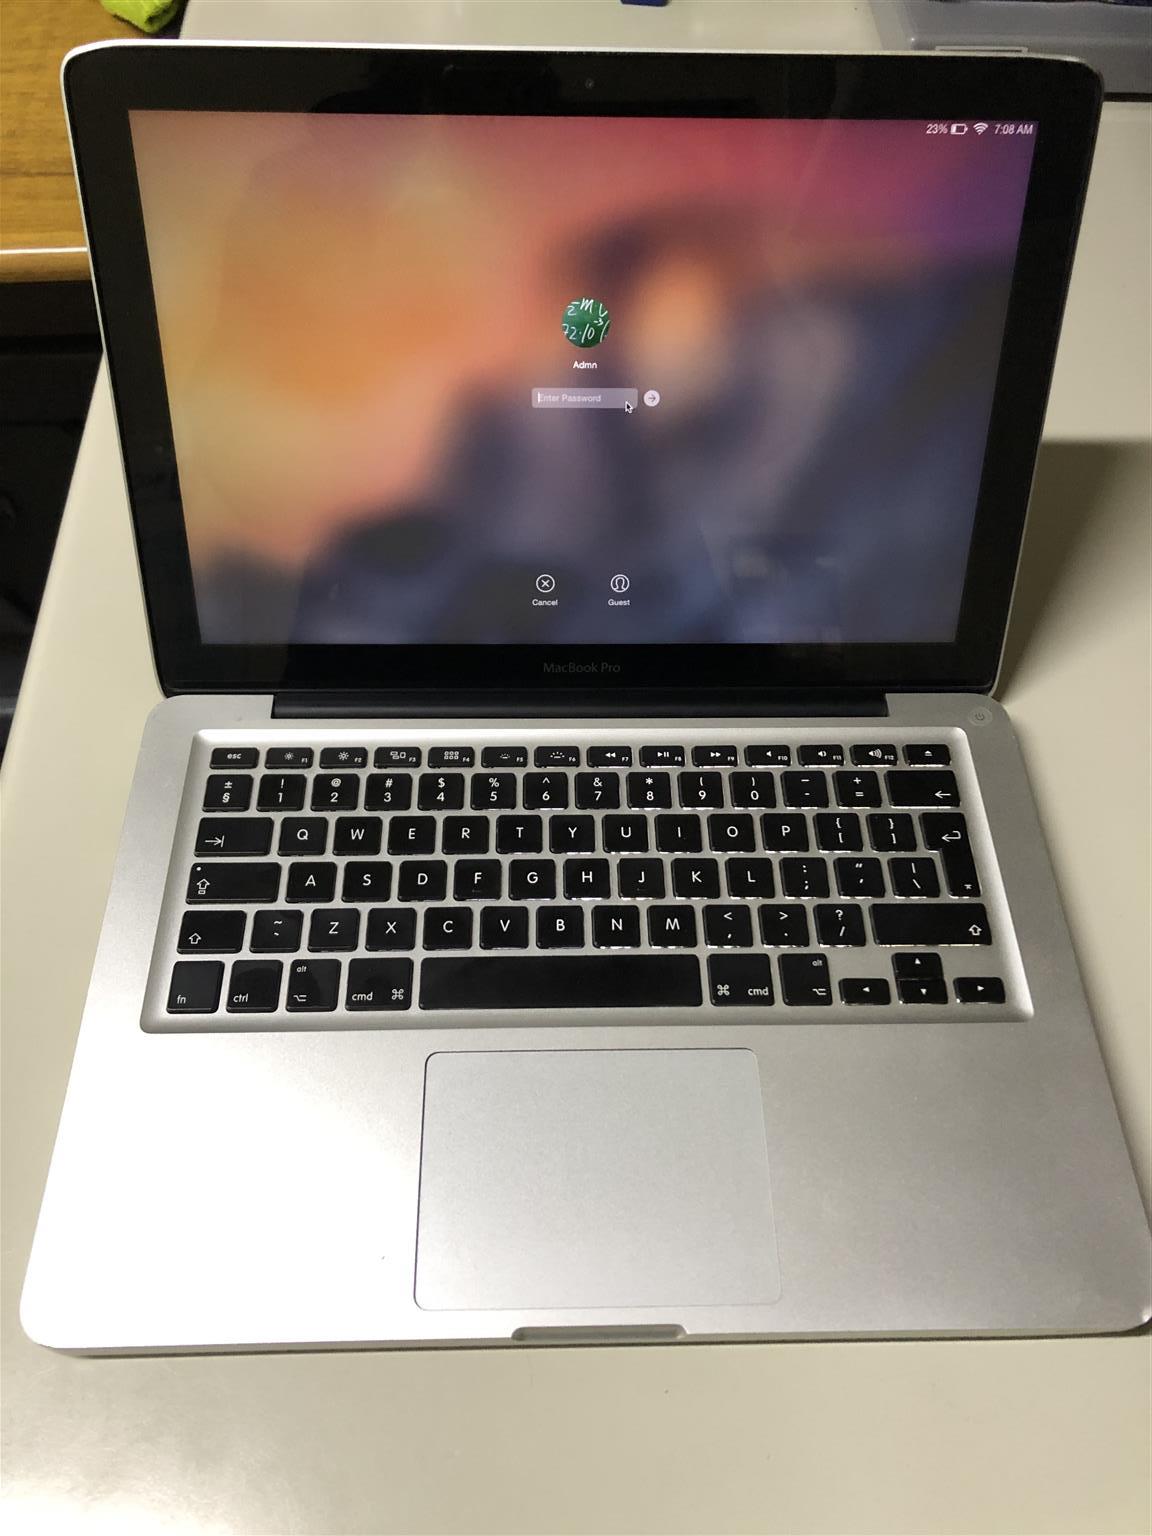 MACBOOK PRO (13-inch, Early 2011) | Junk Mail